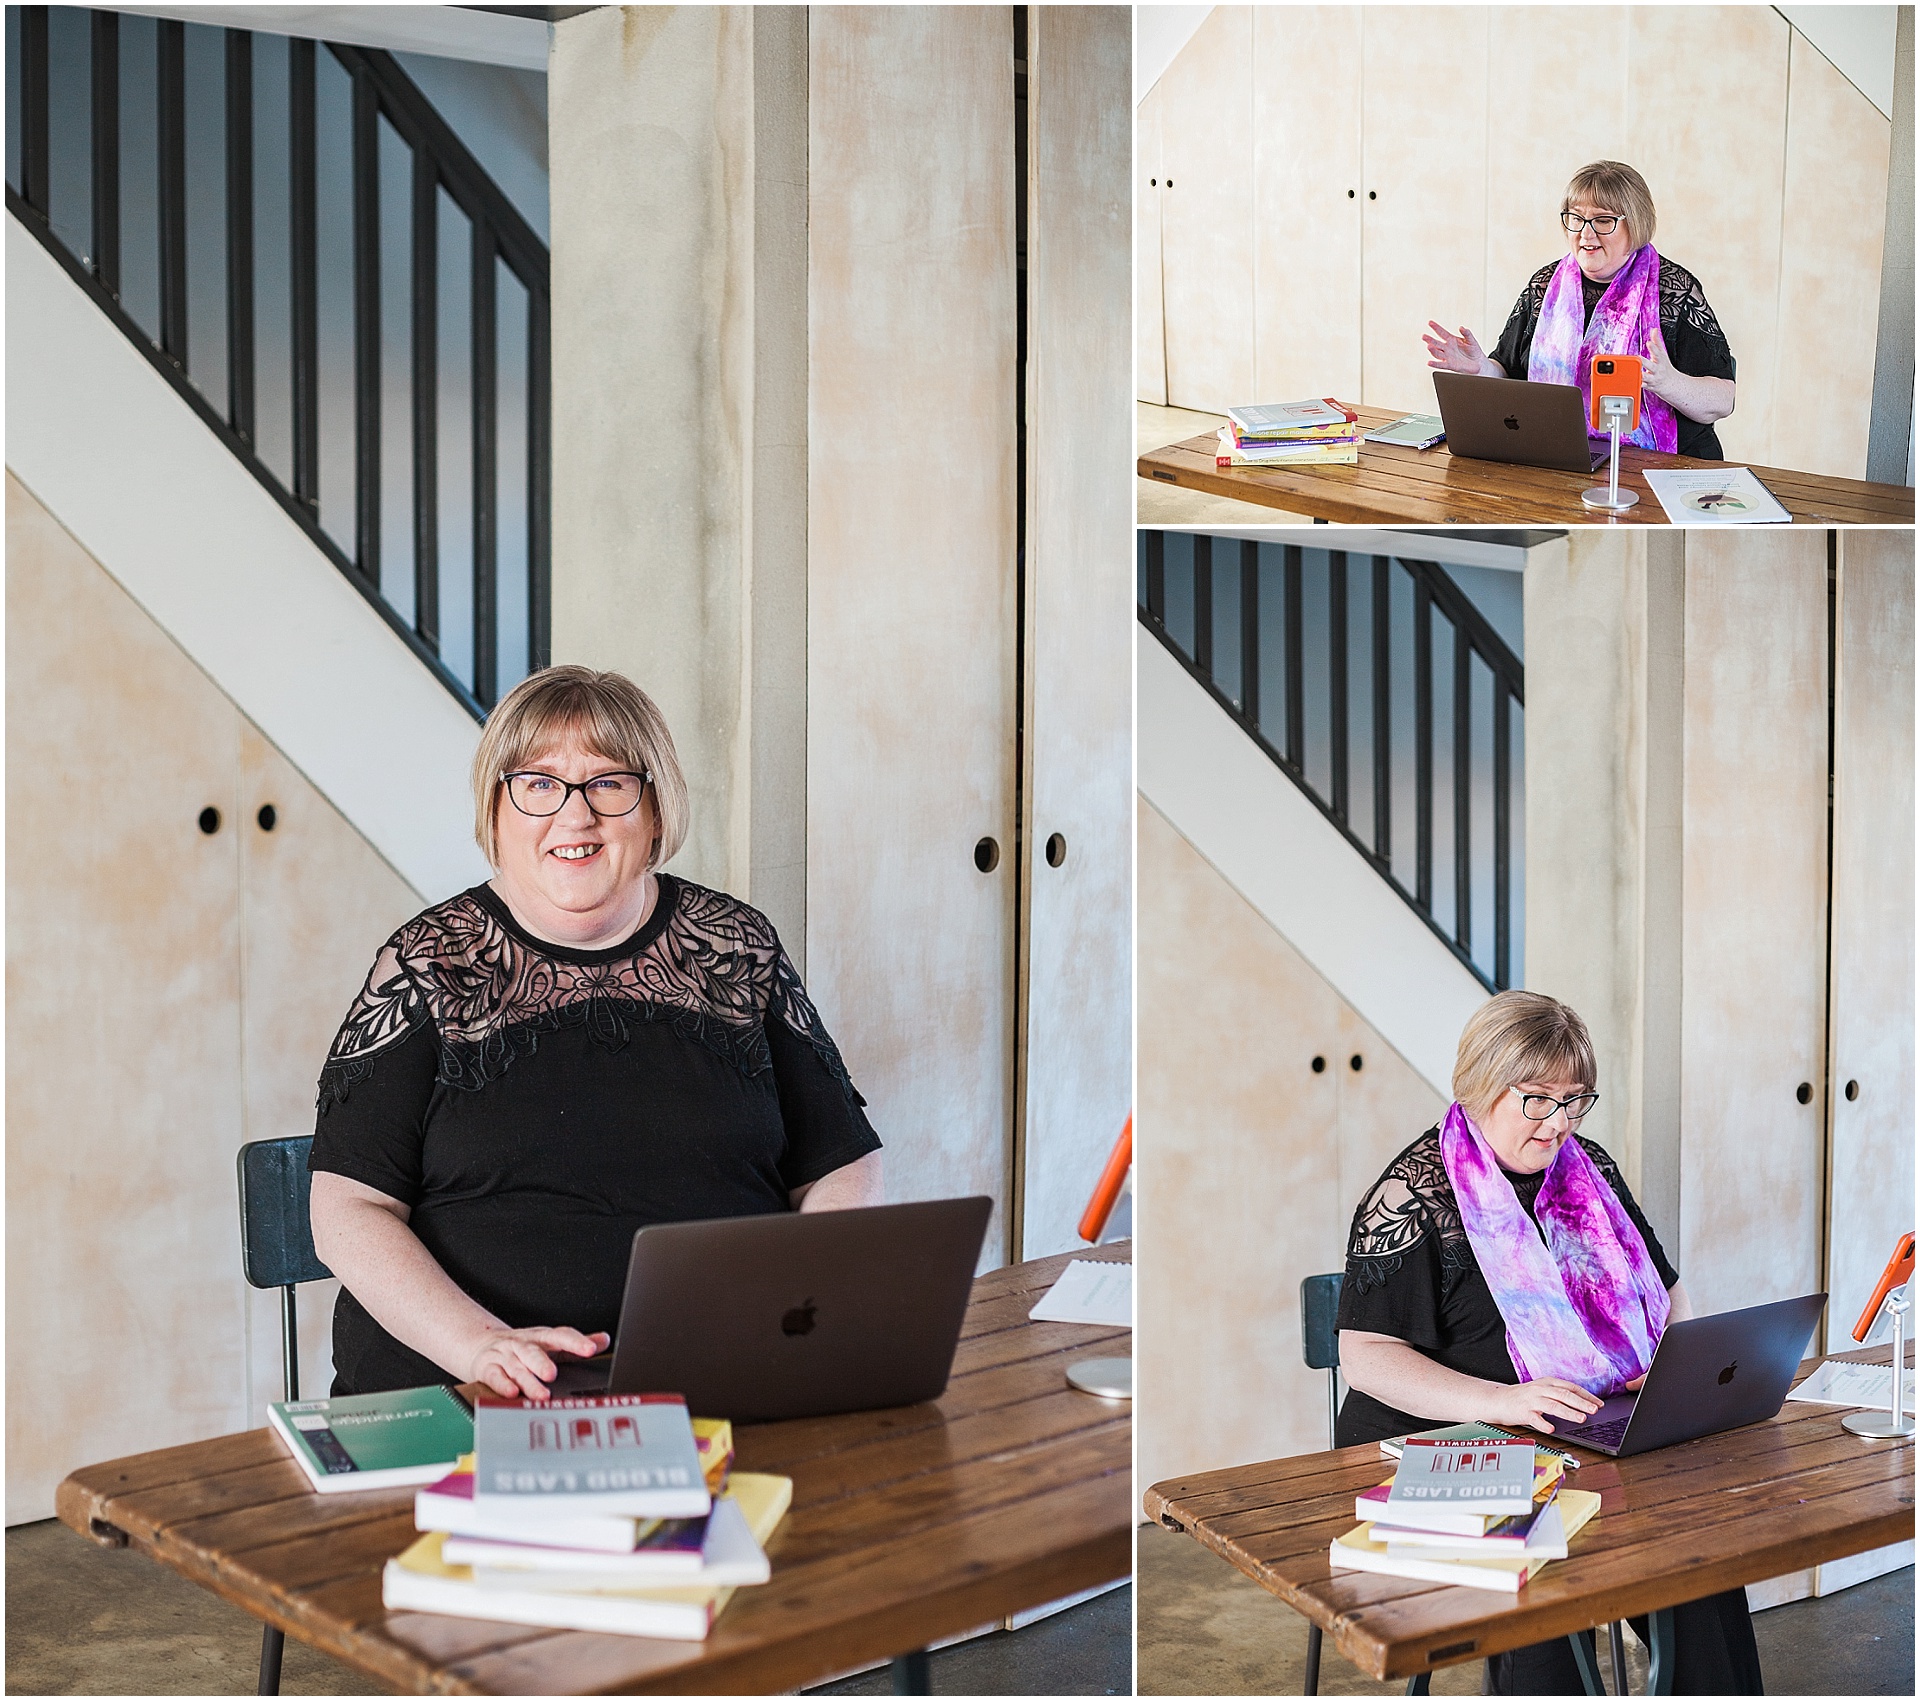 Nutritionist Debbie Grayson. Images by London brand photographer AKP Branding Stories